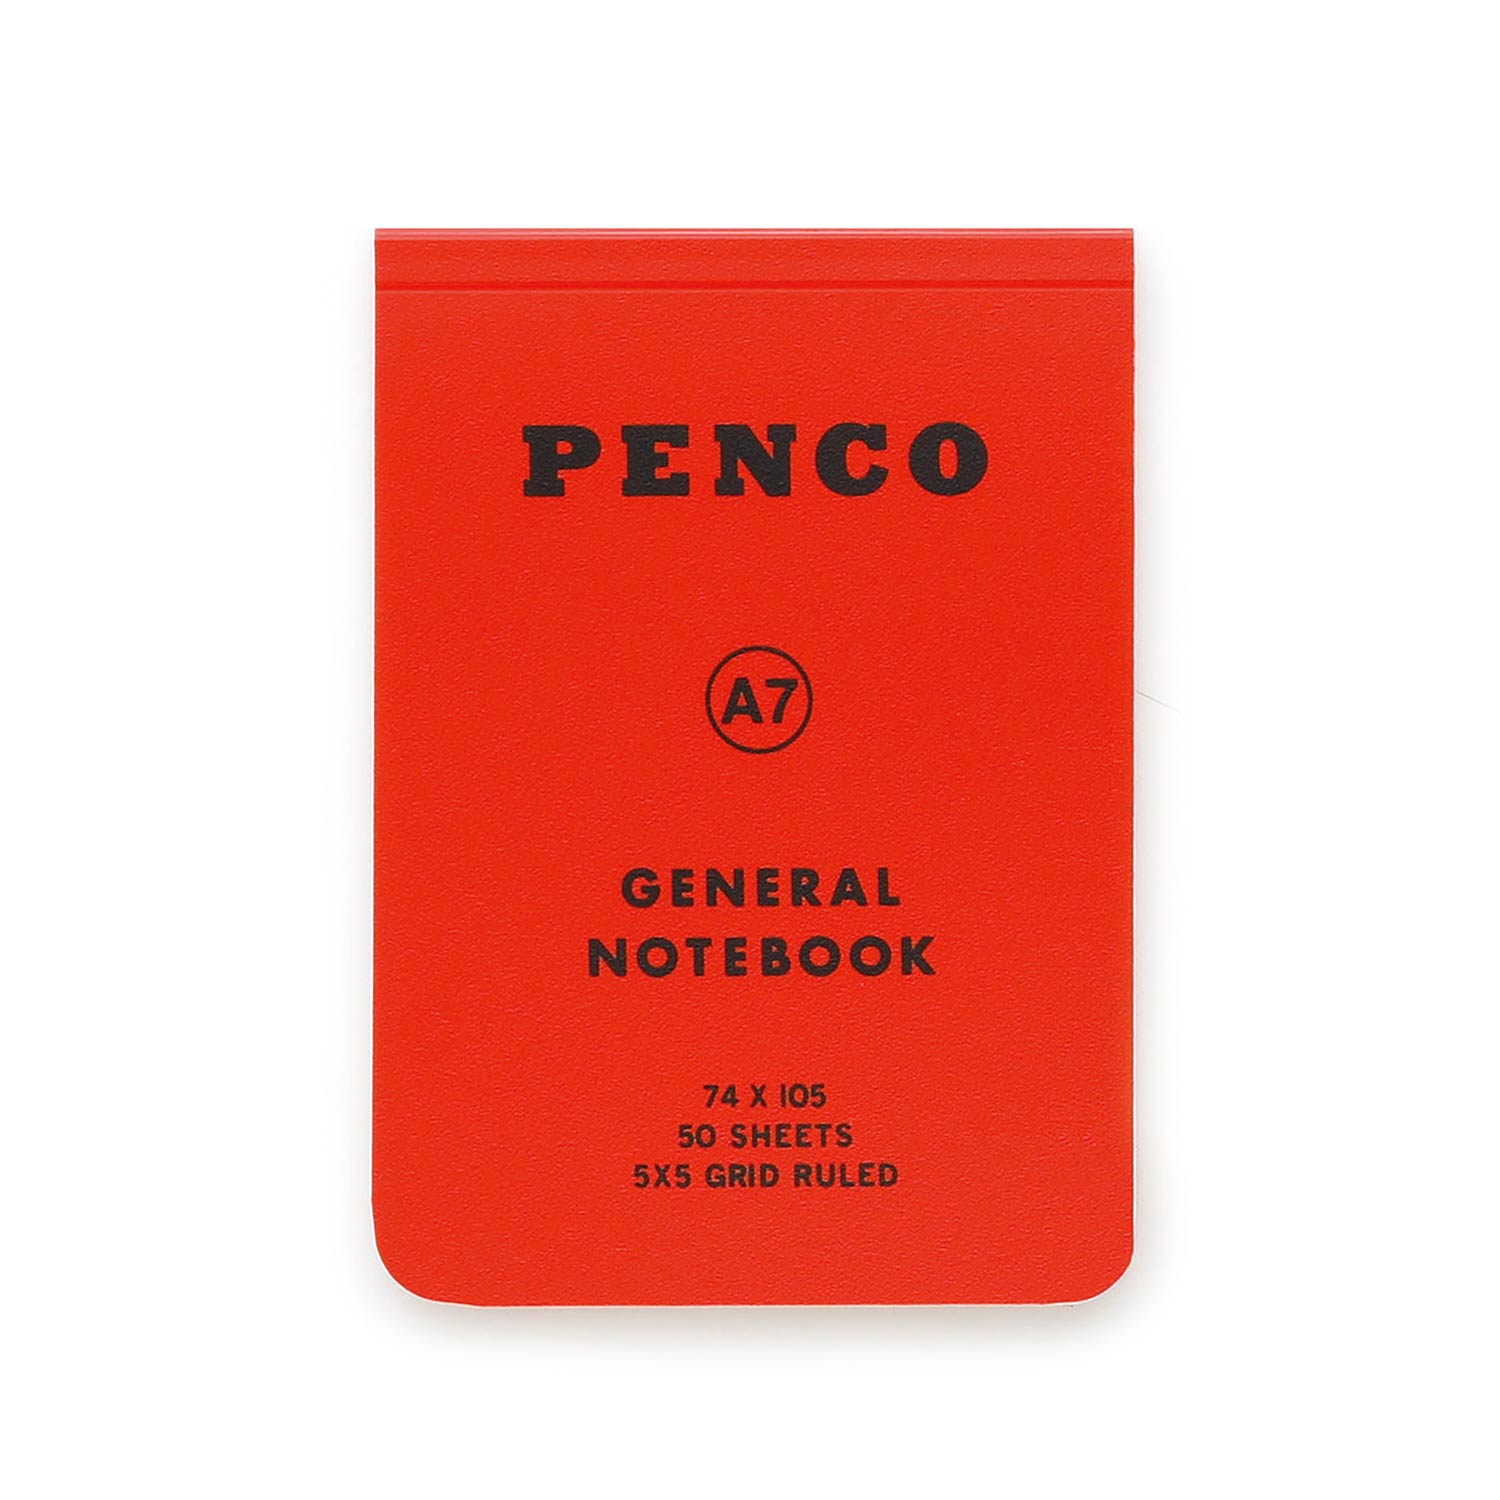 Soft Pp Notebook Penco Stationery Supplies